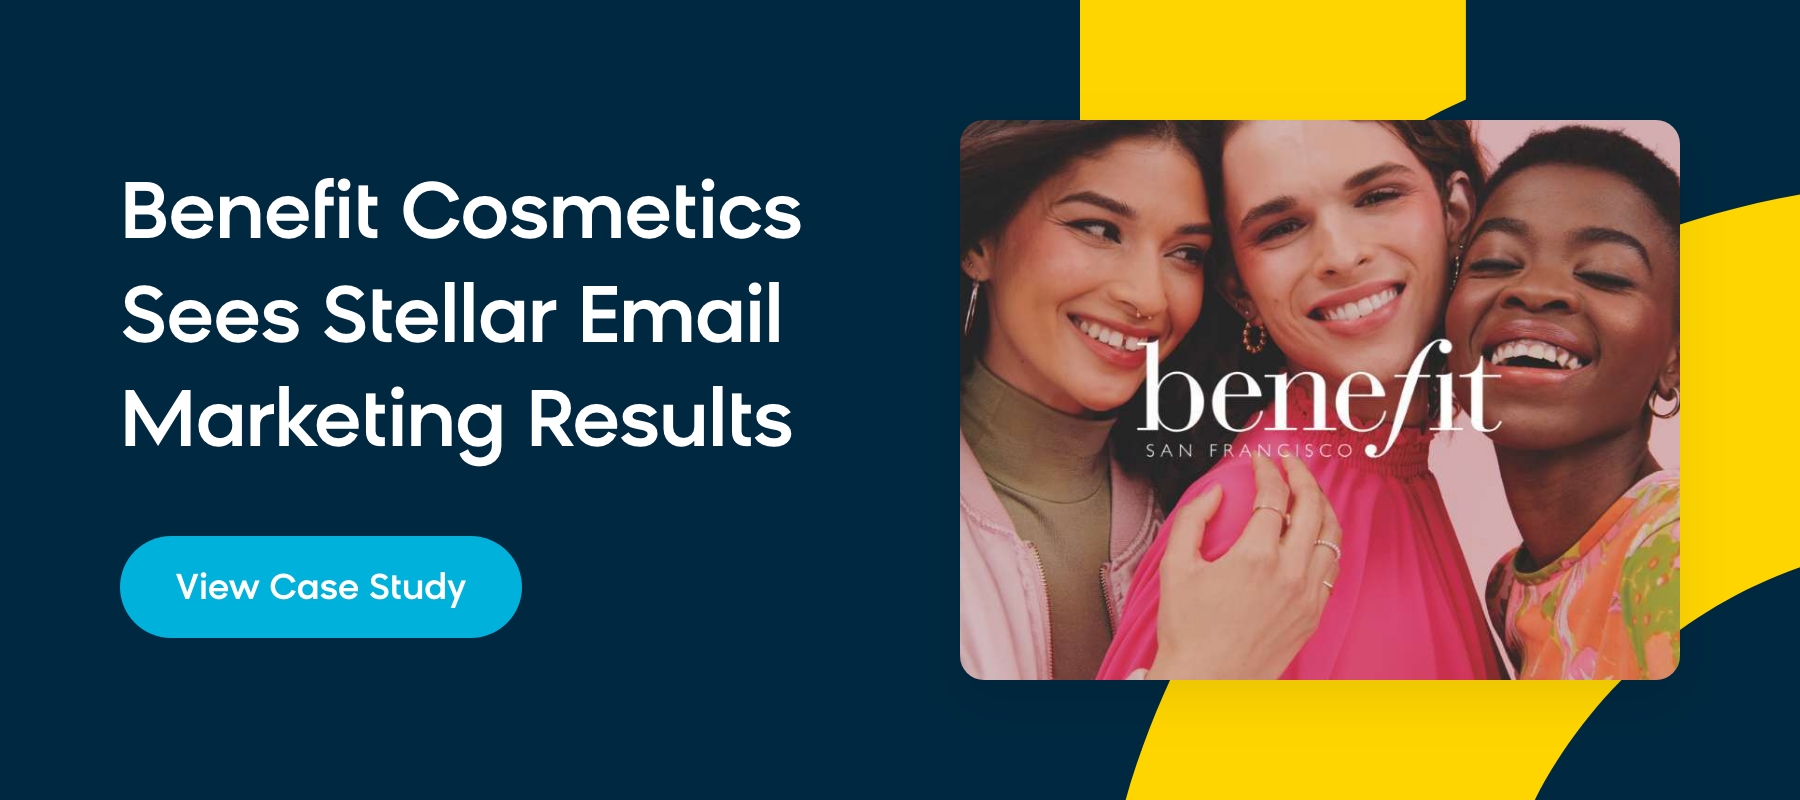 Benefit Cosmetics case study with Bloomreach